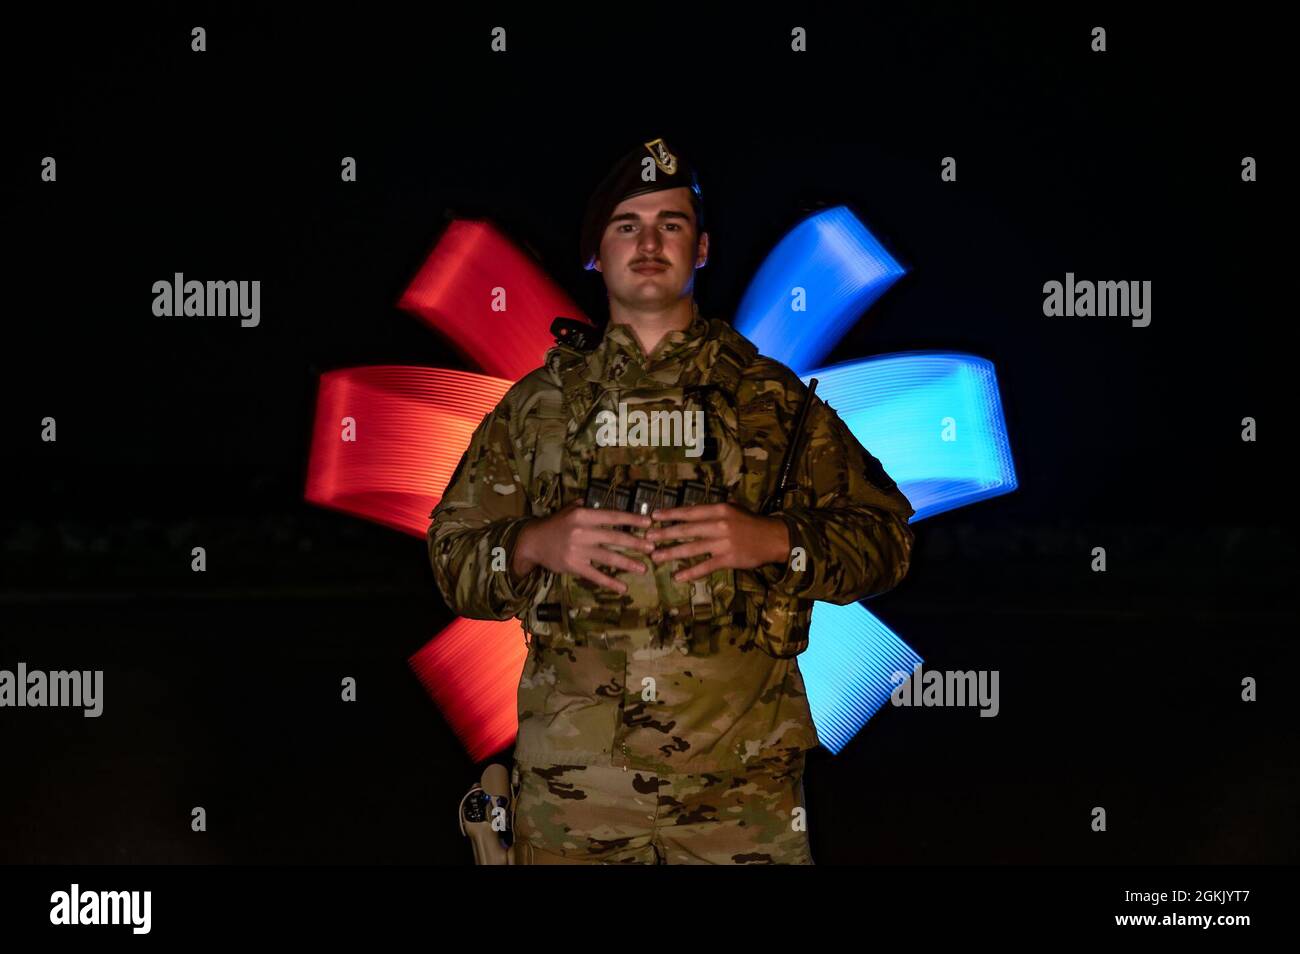 U.S. Air Force Airman First Class Jackson Snyder, 633rd Security Forces Squadron installation entry control officer, poses for a photo at Joint Base Langley-Eustis, Virginia, May 9, 2021. Stock Photo